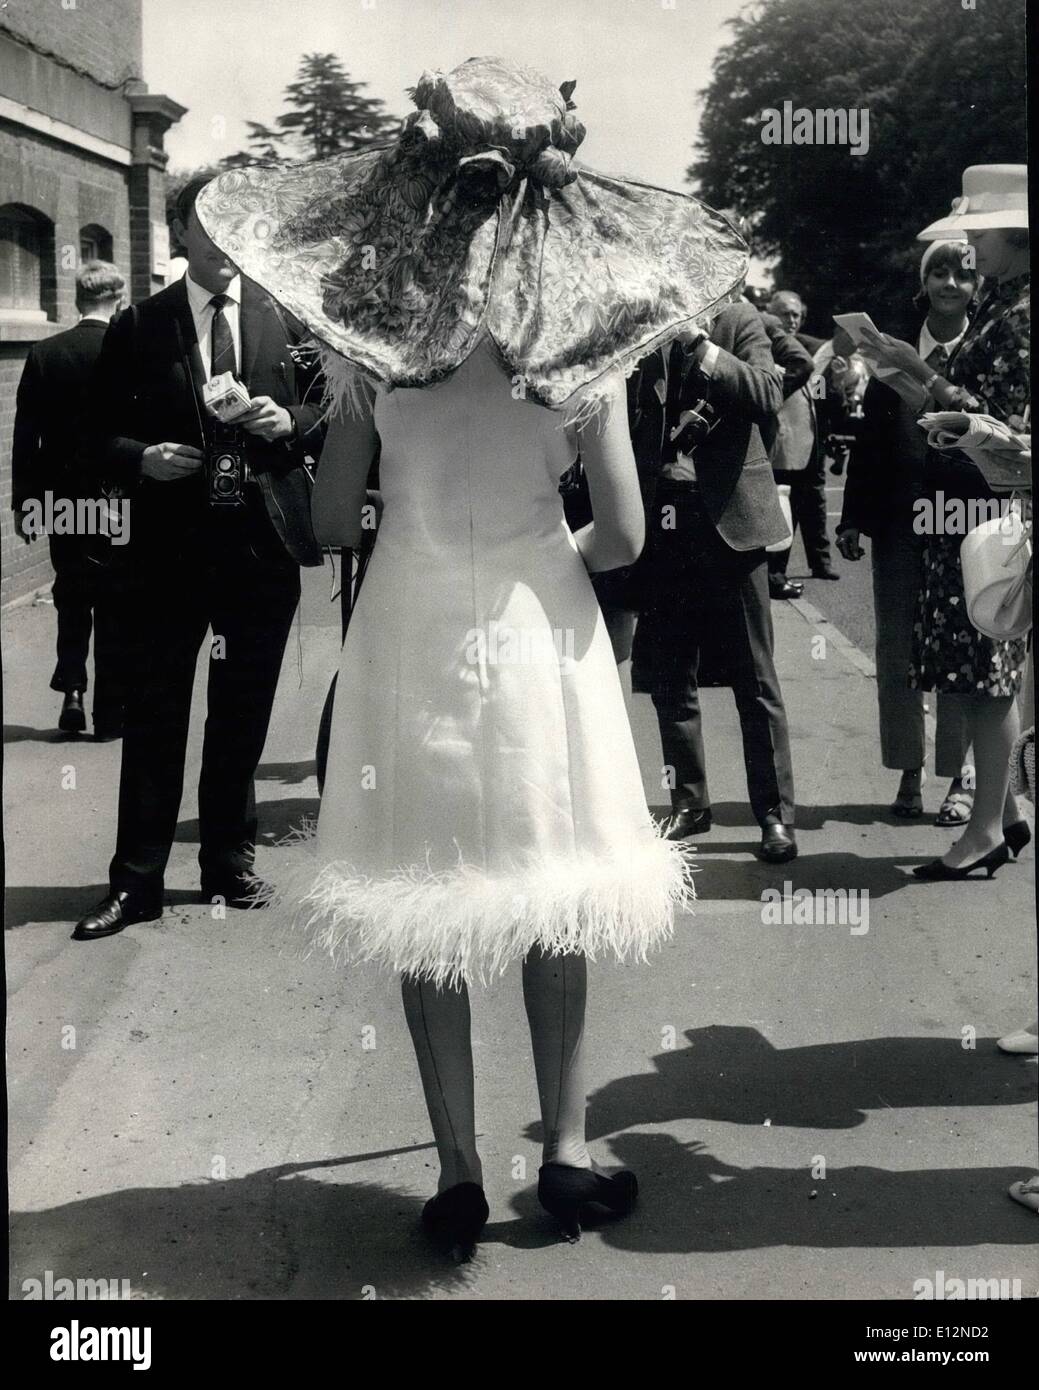 Feb. 24, 2012 - The first day of the Royal Ascot Meeting Fashions at Ascot: This large butterfly hat was worn by Mrs. James Elliott when she arrived for the Ascot meeting today. Stock Photo